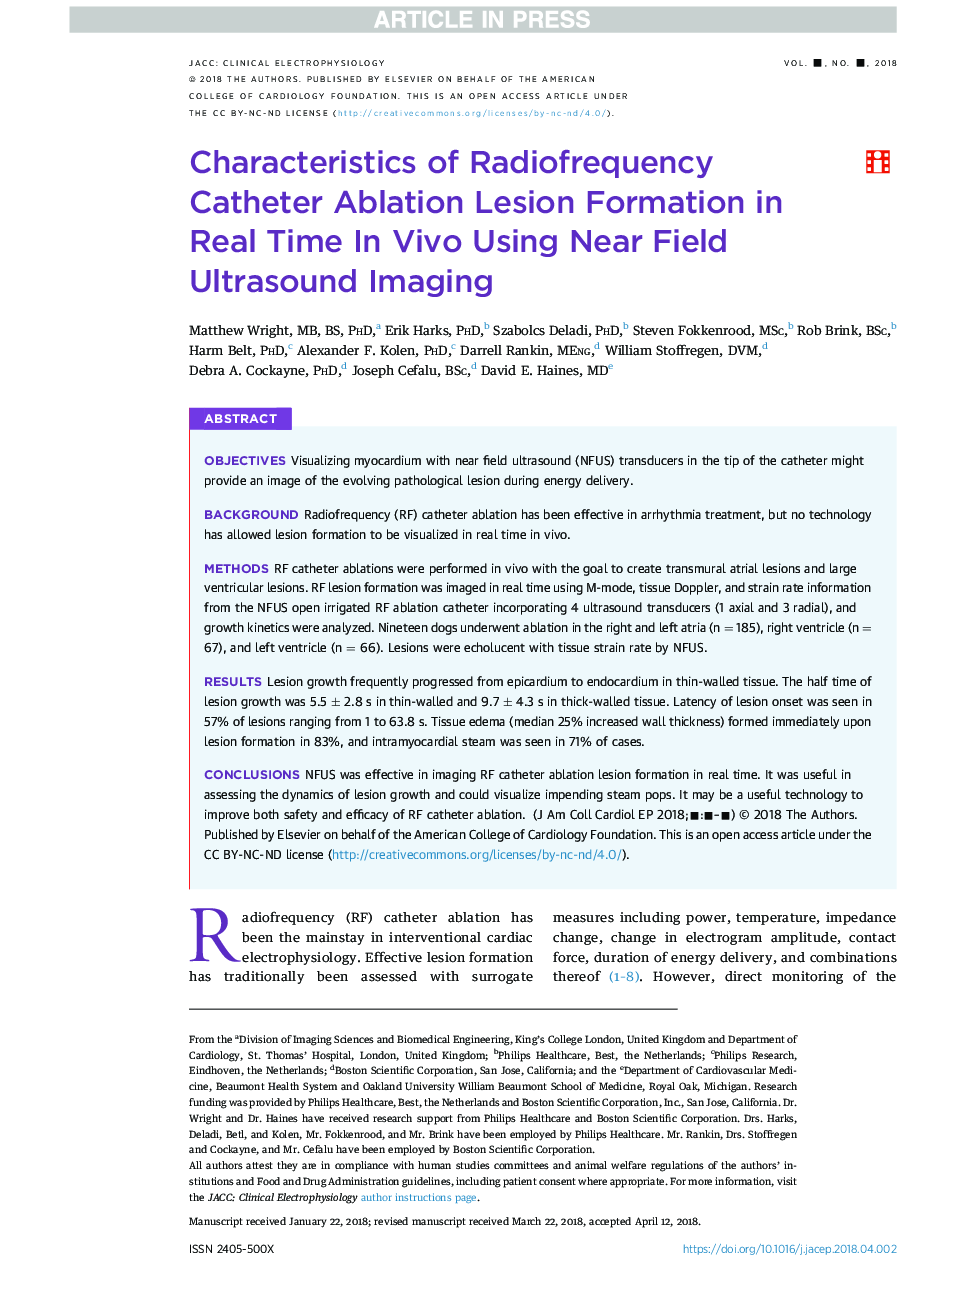 Characteristics of Radiofrequency Catheter Ablation Lesion Formation in Real Time InÂ Vivo Using Near Field Ultrasound Imaging